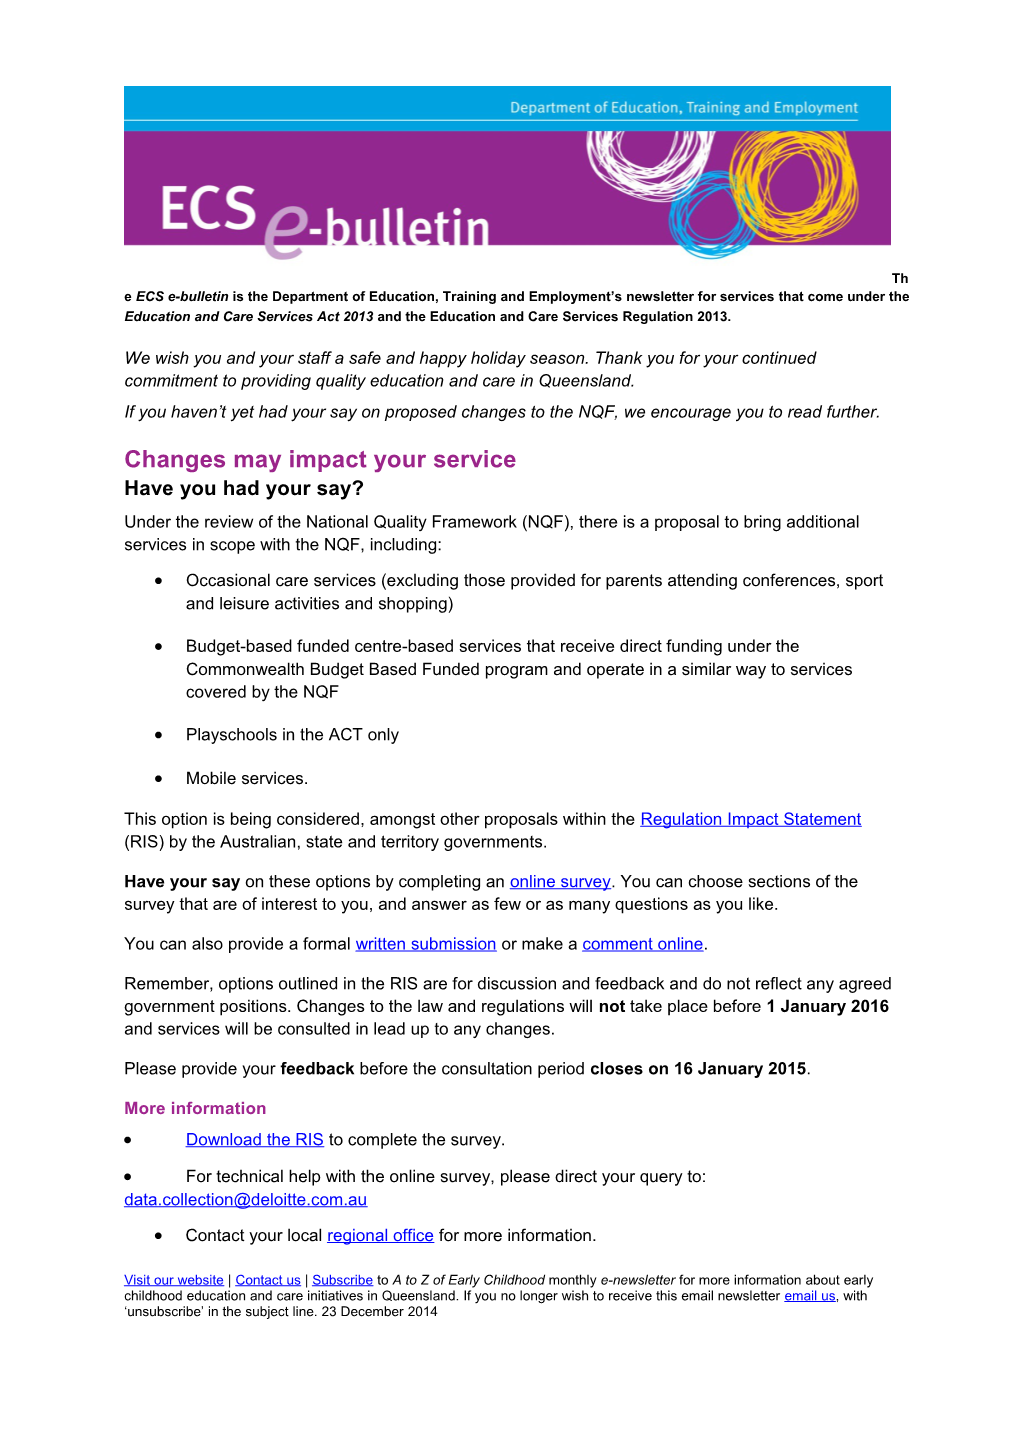 ECS E-Bulletin - Changes May Impact Your Service